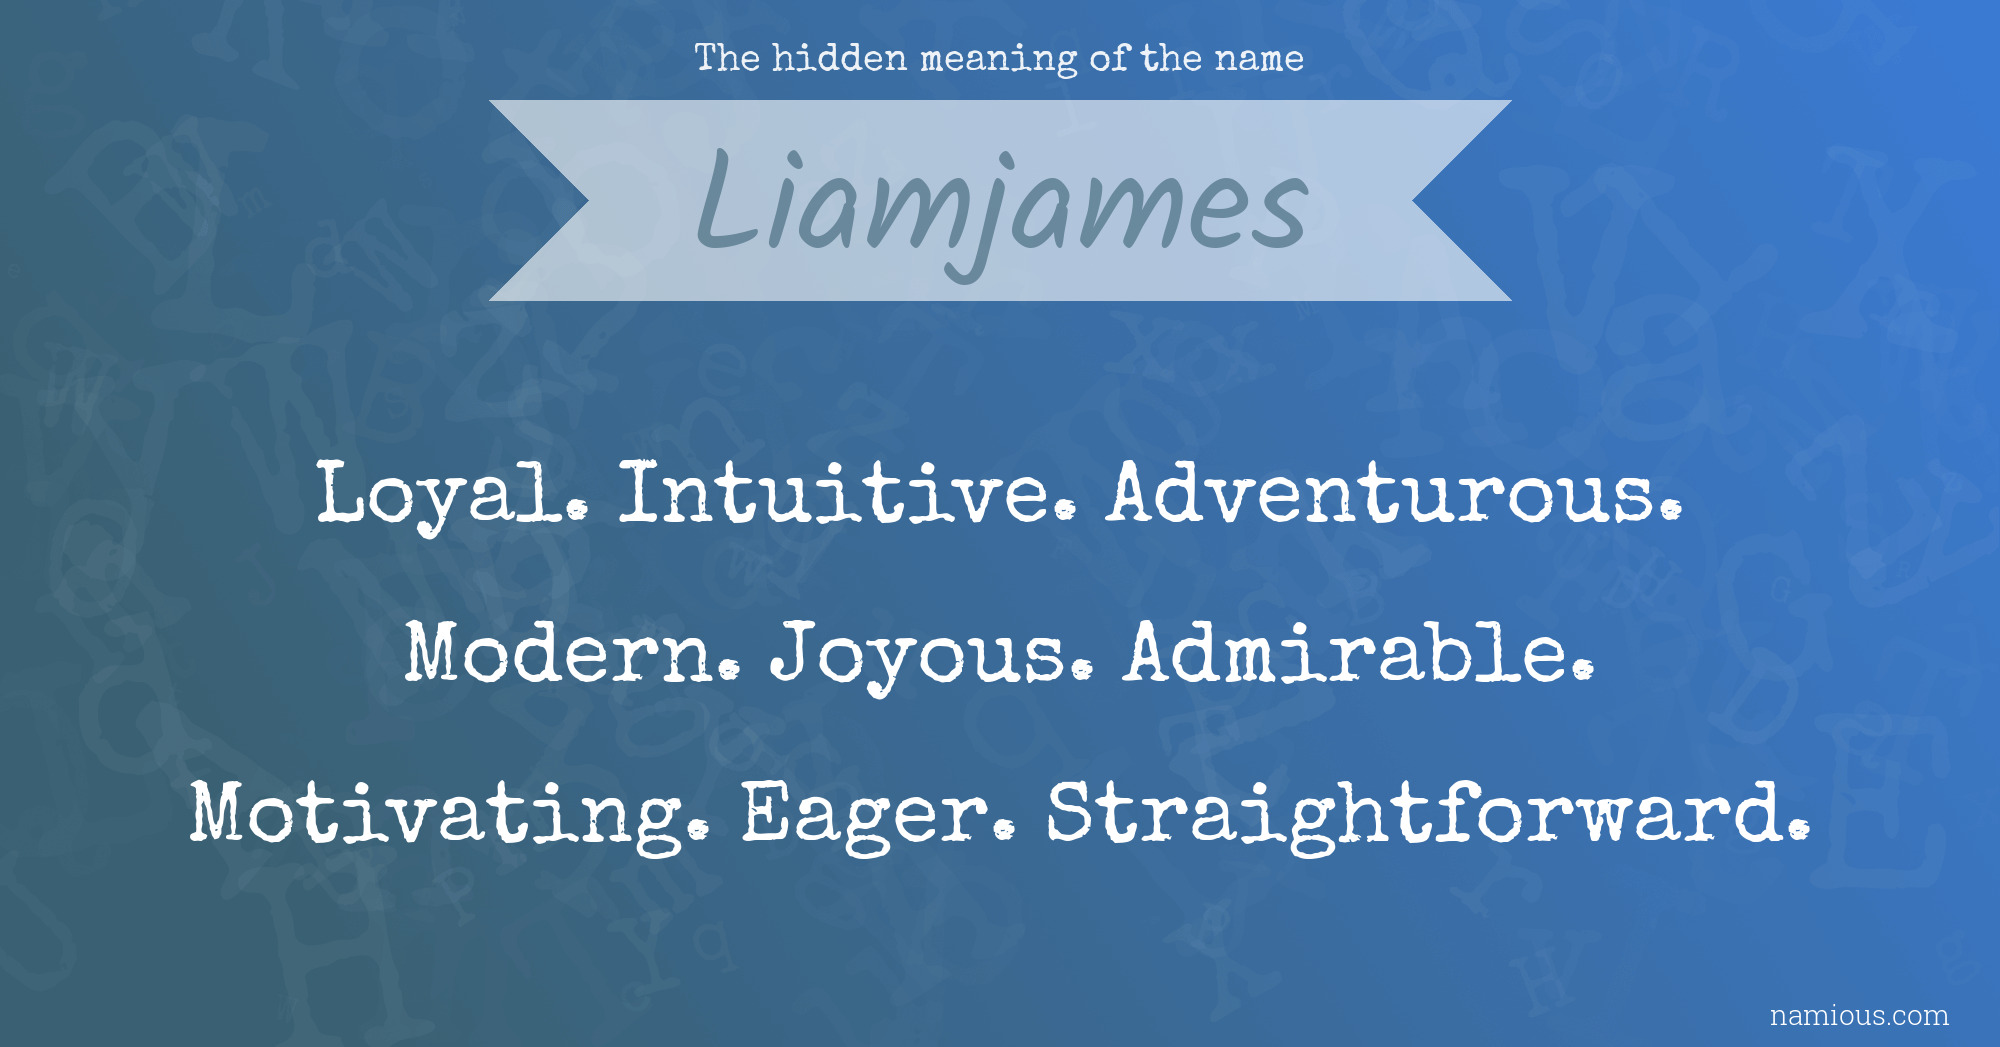 The hidden meaning of the name Liamjames